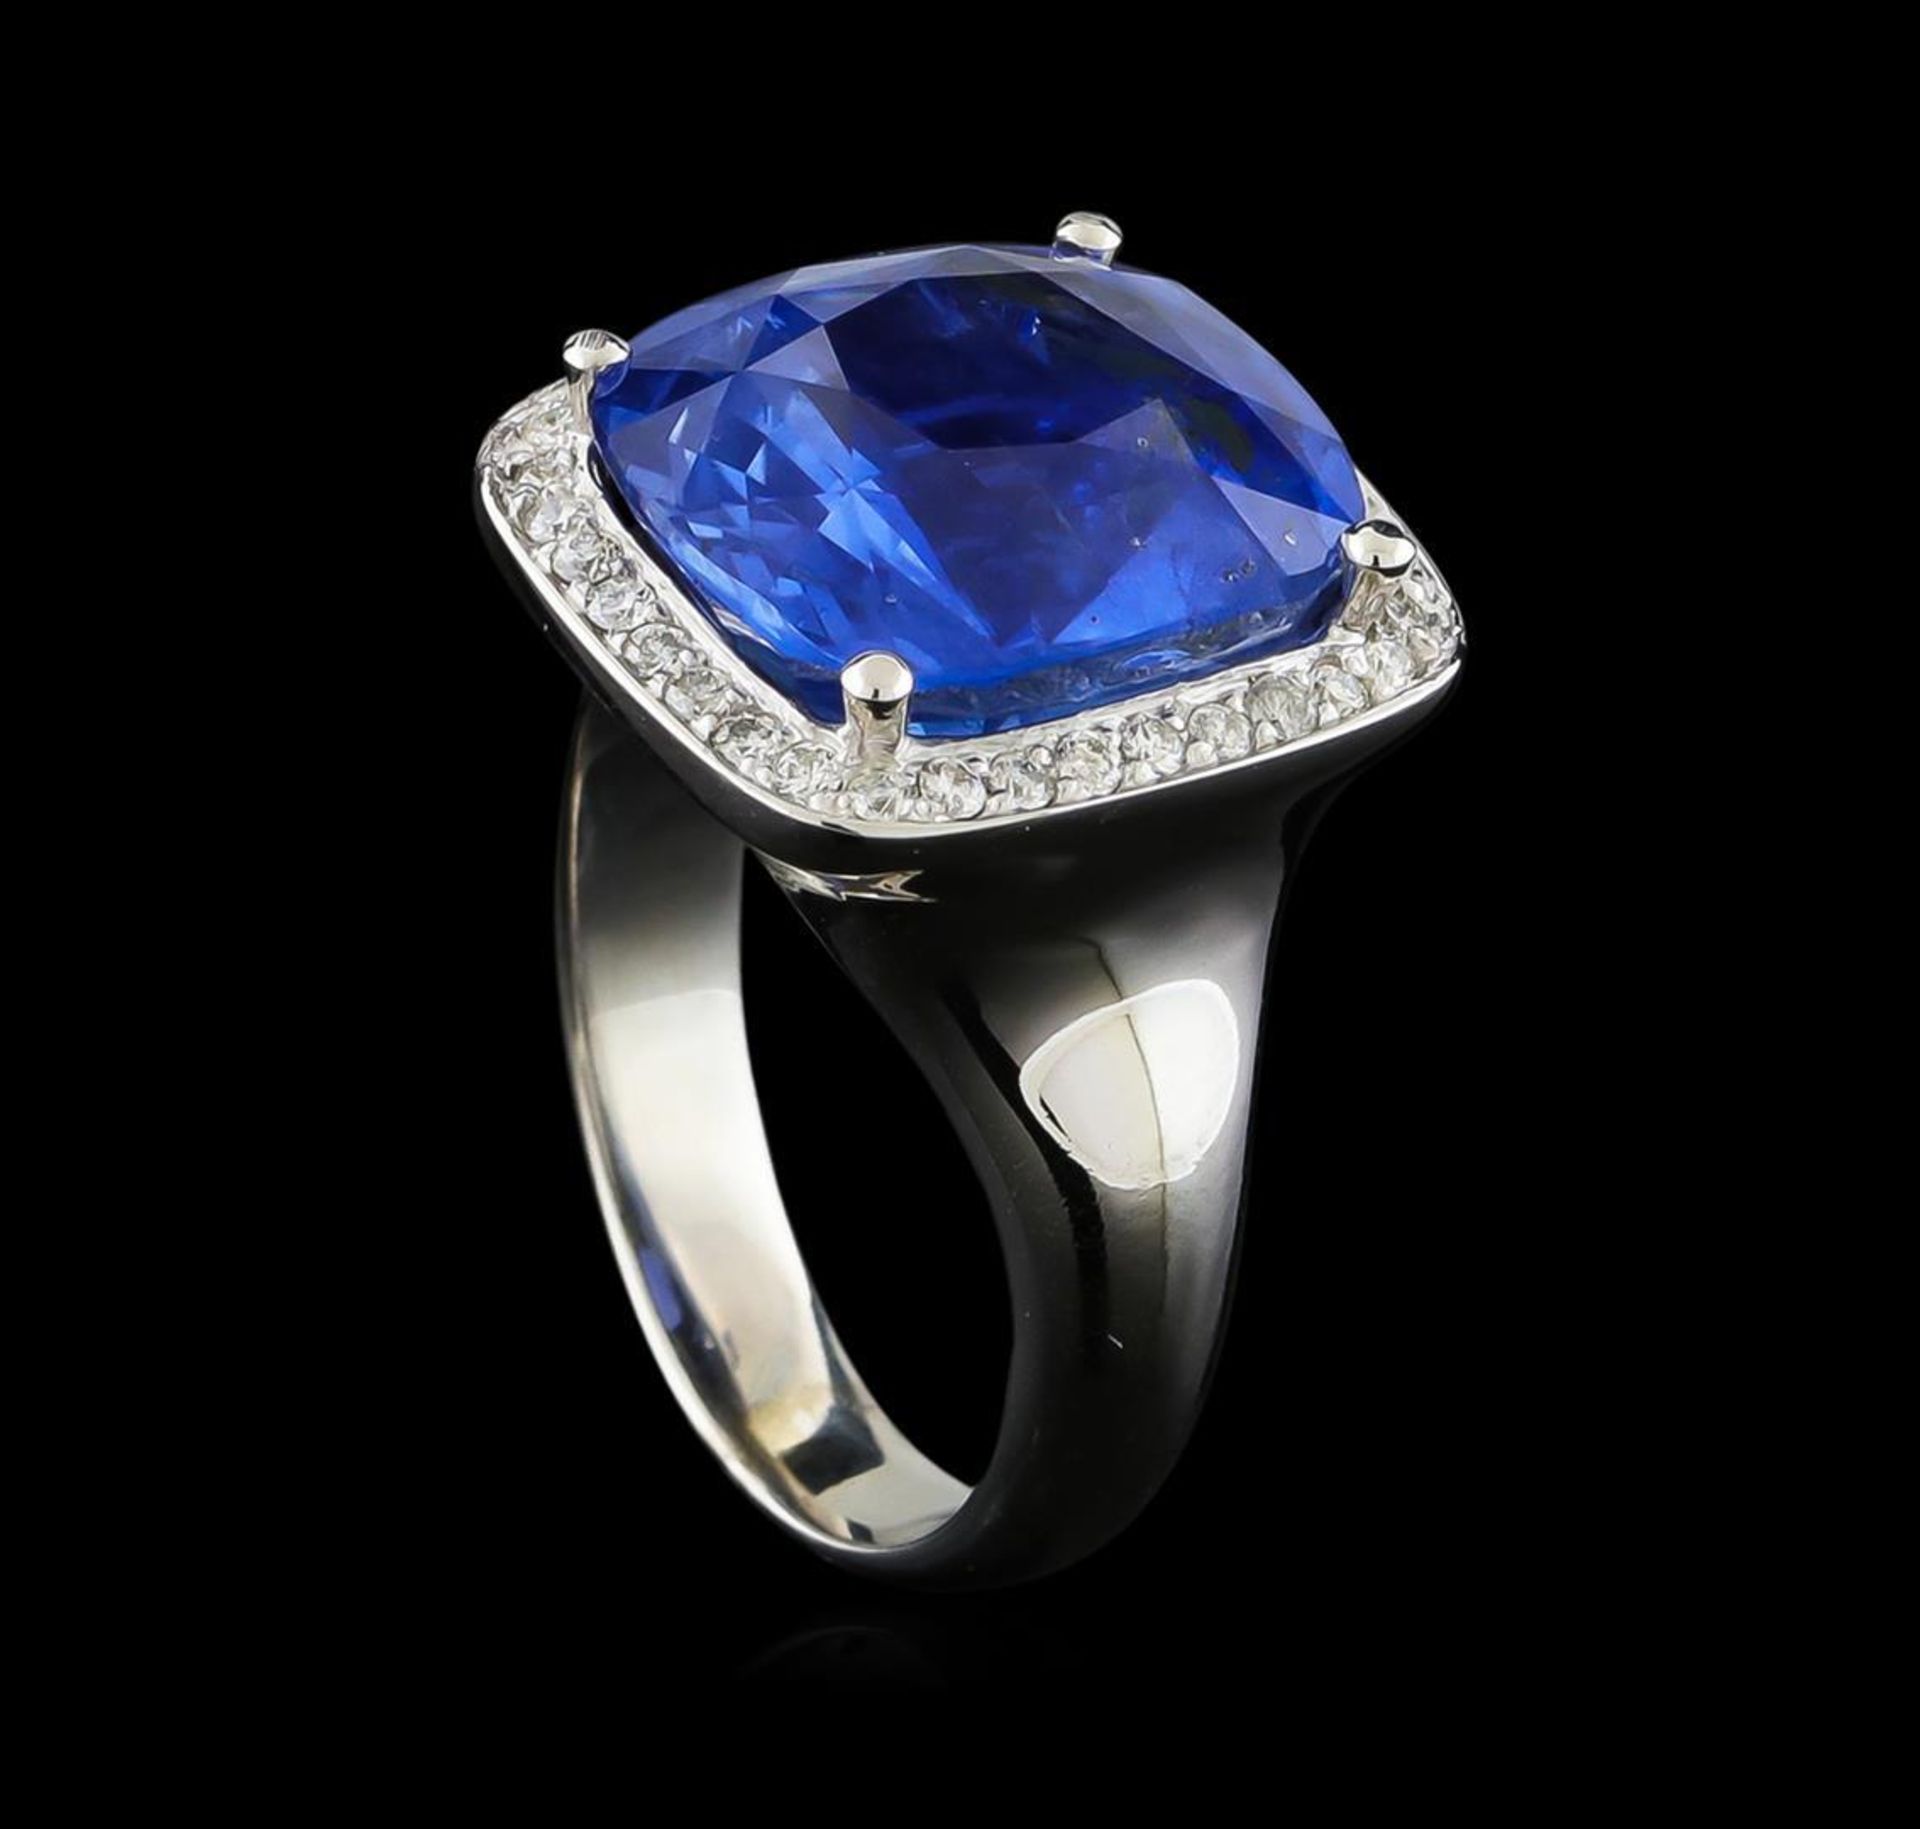 GIA Cert 13.93 ctw Blue Sapphire and Diamond Ring - 14KT White Gold - Image 4 of 5